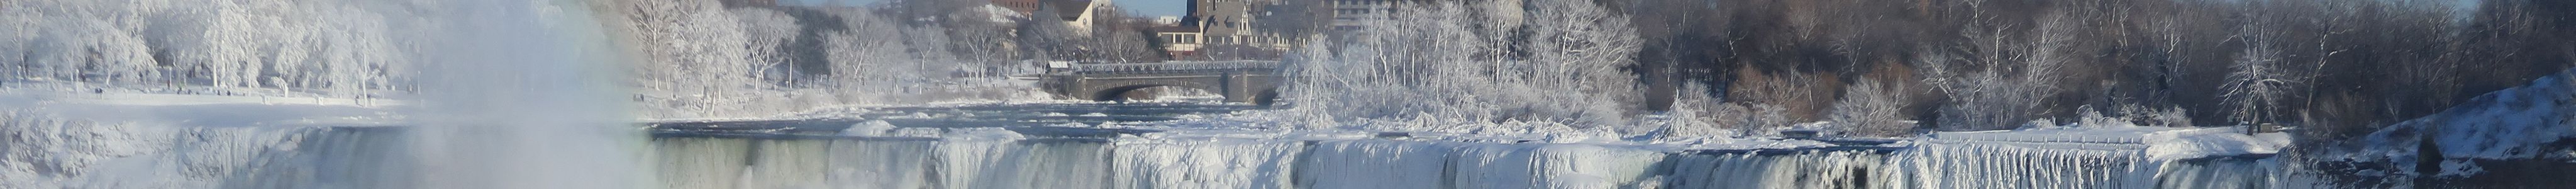 Fact or Fiction: Does Niagara Falls Freeze in the Winter?